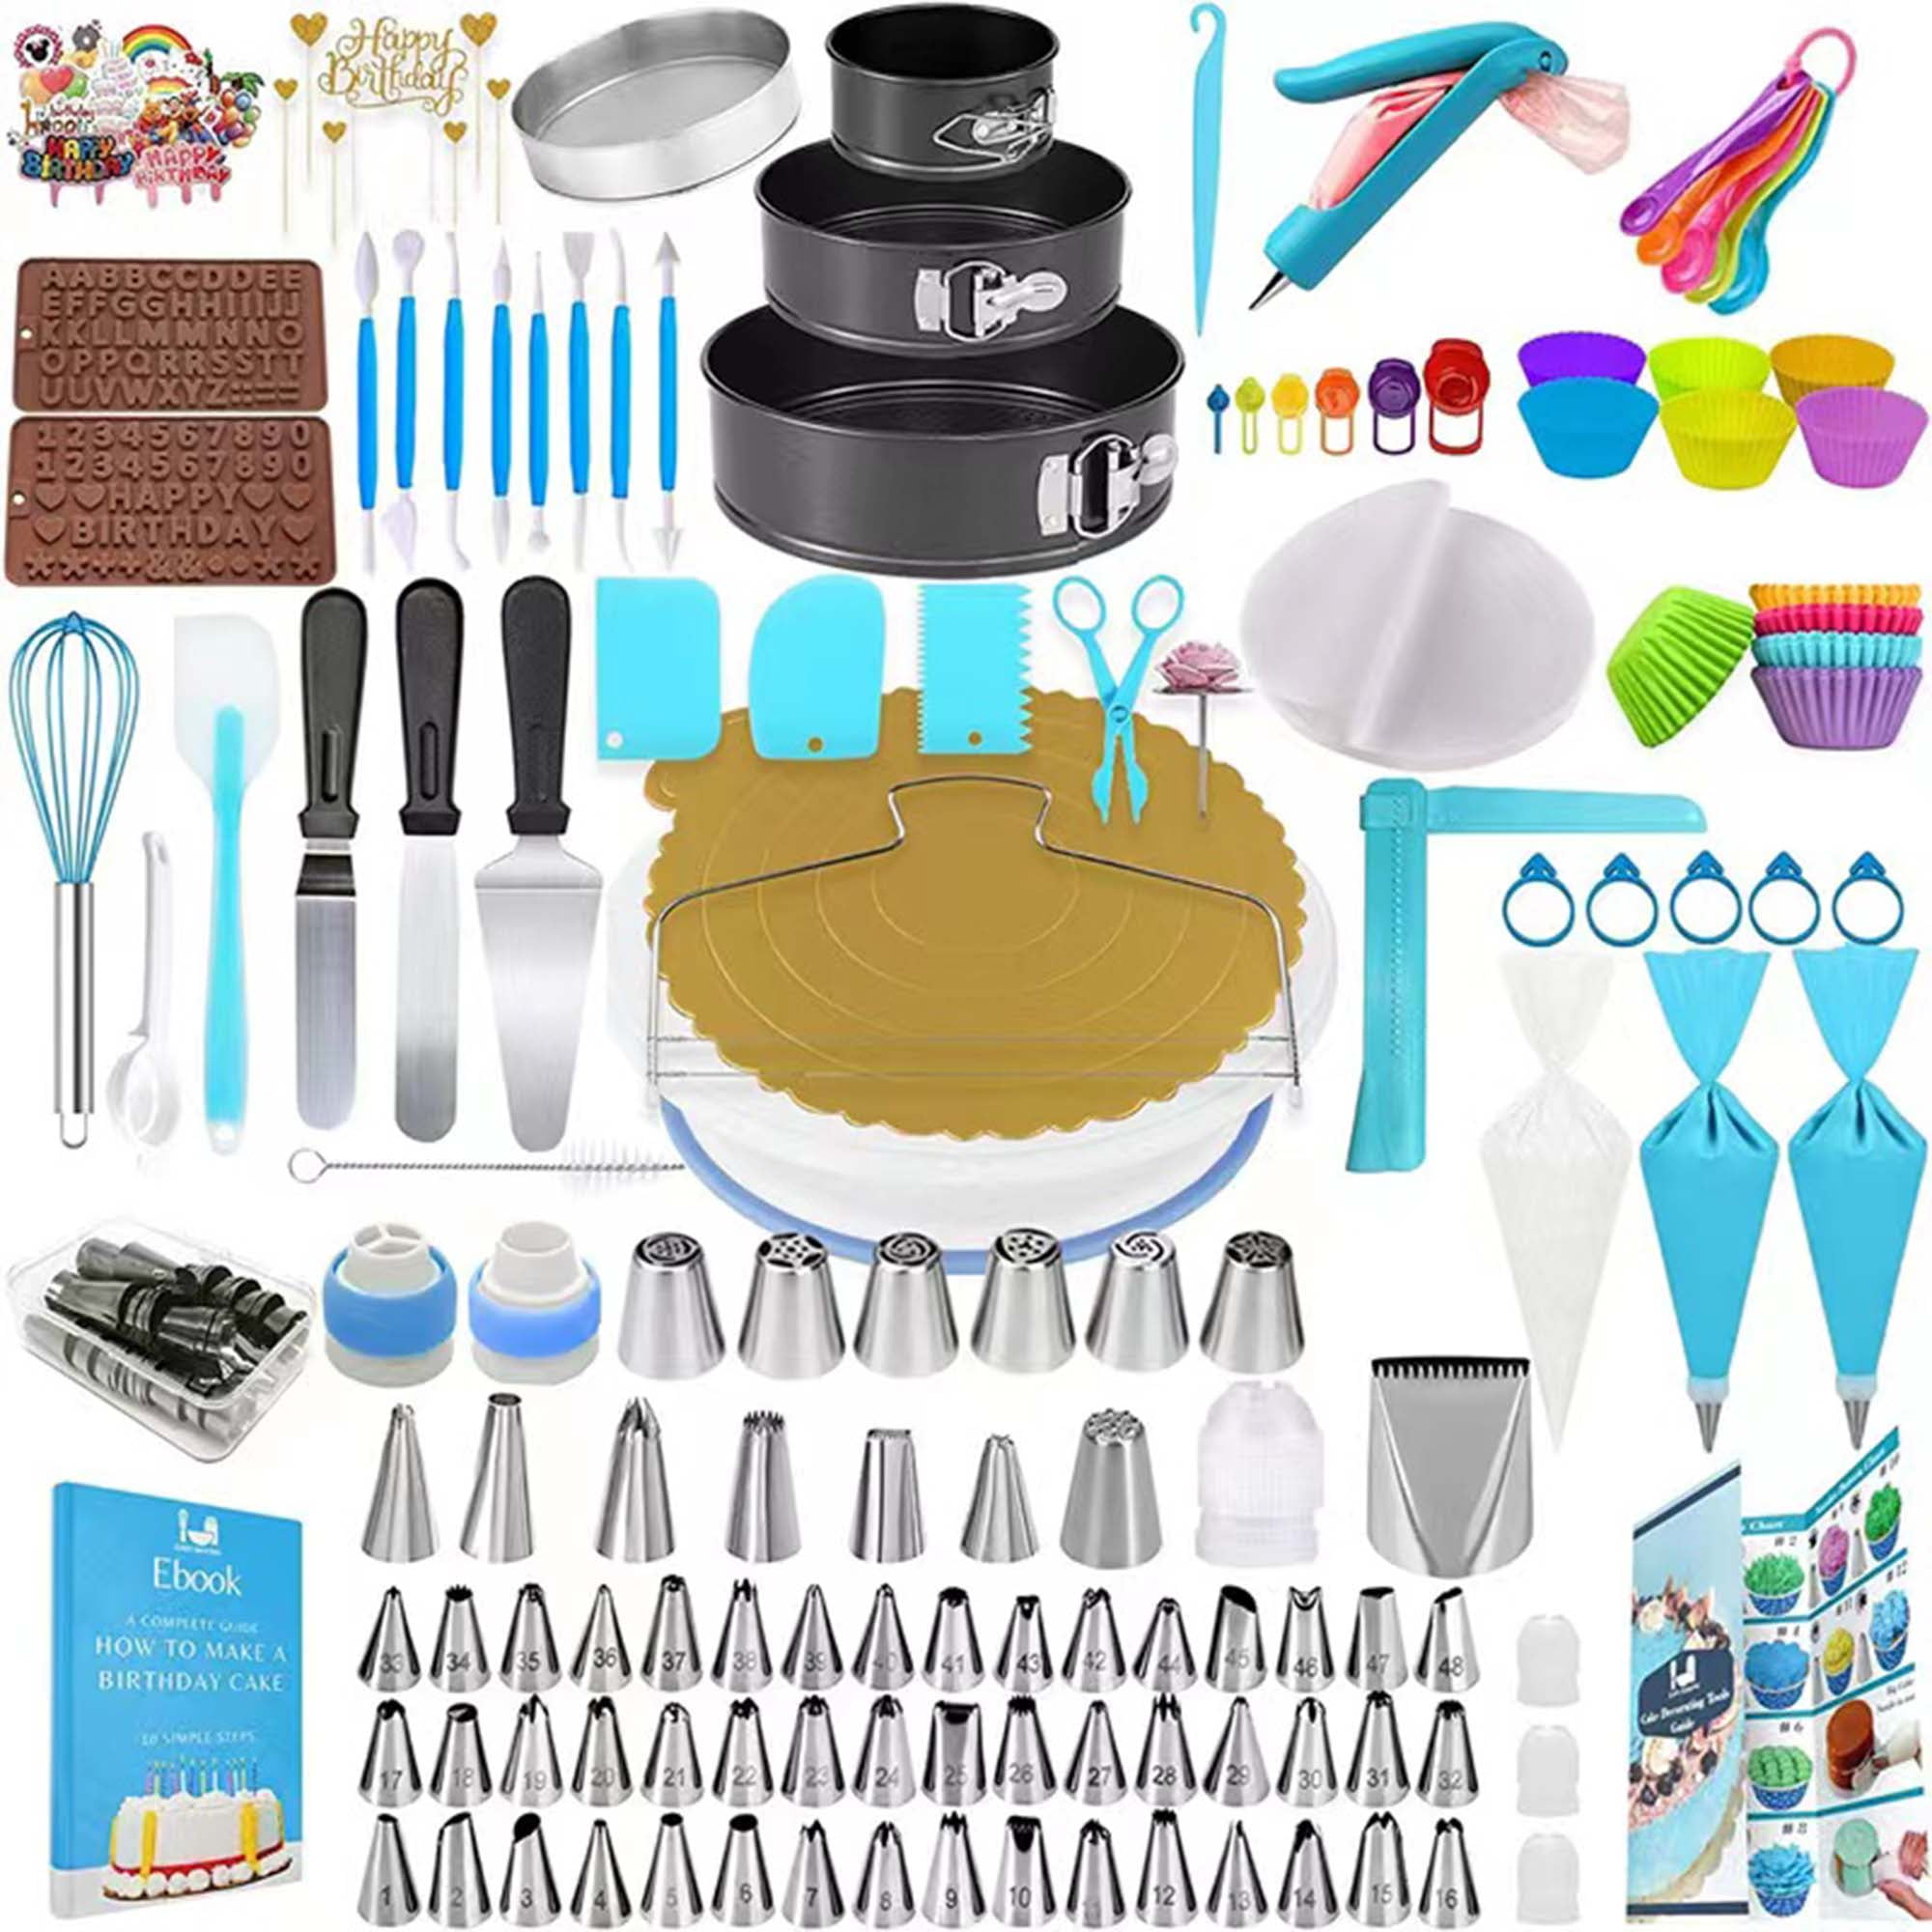  BURU Cake Decorating Kit,250 pcs Cake Decorating Supplies With  Cake Turntable set For Decorating,Pastry Piping Bag,cake spatula Baking  Tools, Cake Baking Supplies For Beginners: Home & Kitchen